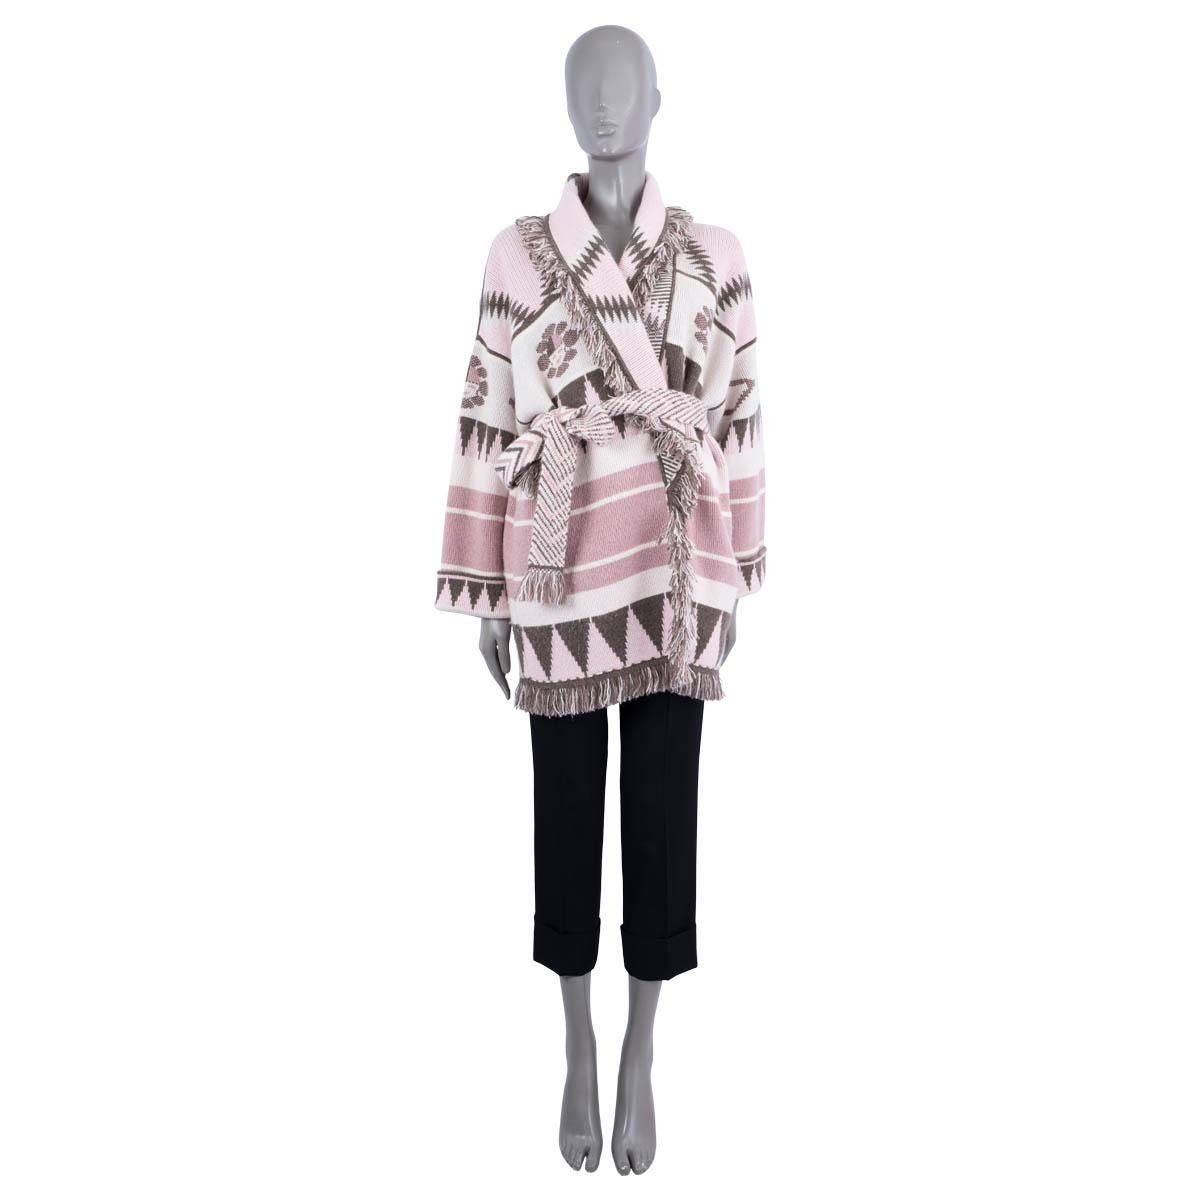 100% authentic Alanui Icon belted jacquard wrap cardigan in Ophelia pink cashmere (100%) with details in brown, pale pink and ivory. Features fringed edges and two side pockets. Has been worn and is in excellent condition.

Measurements
Tag